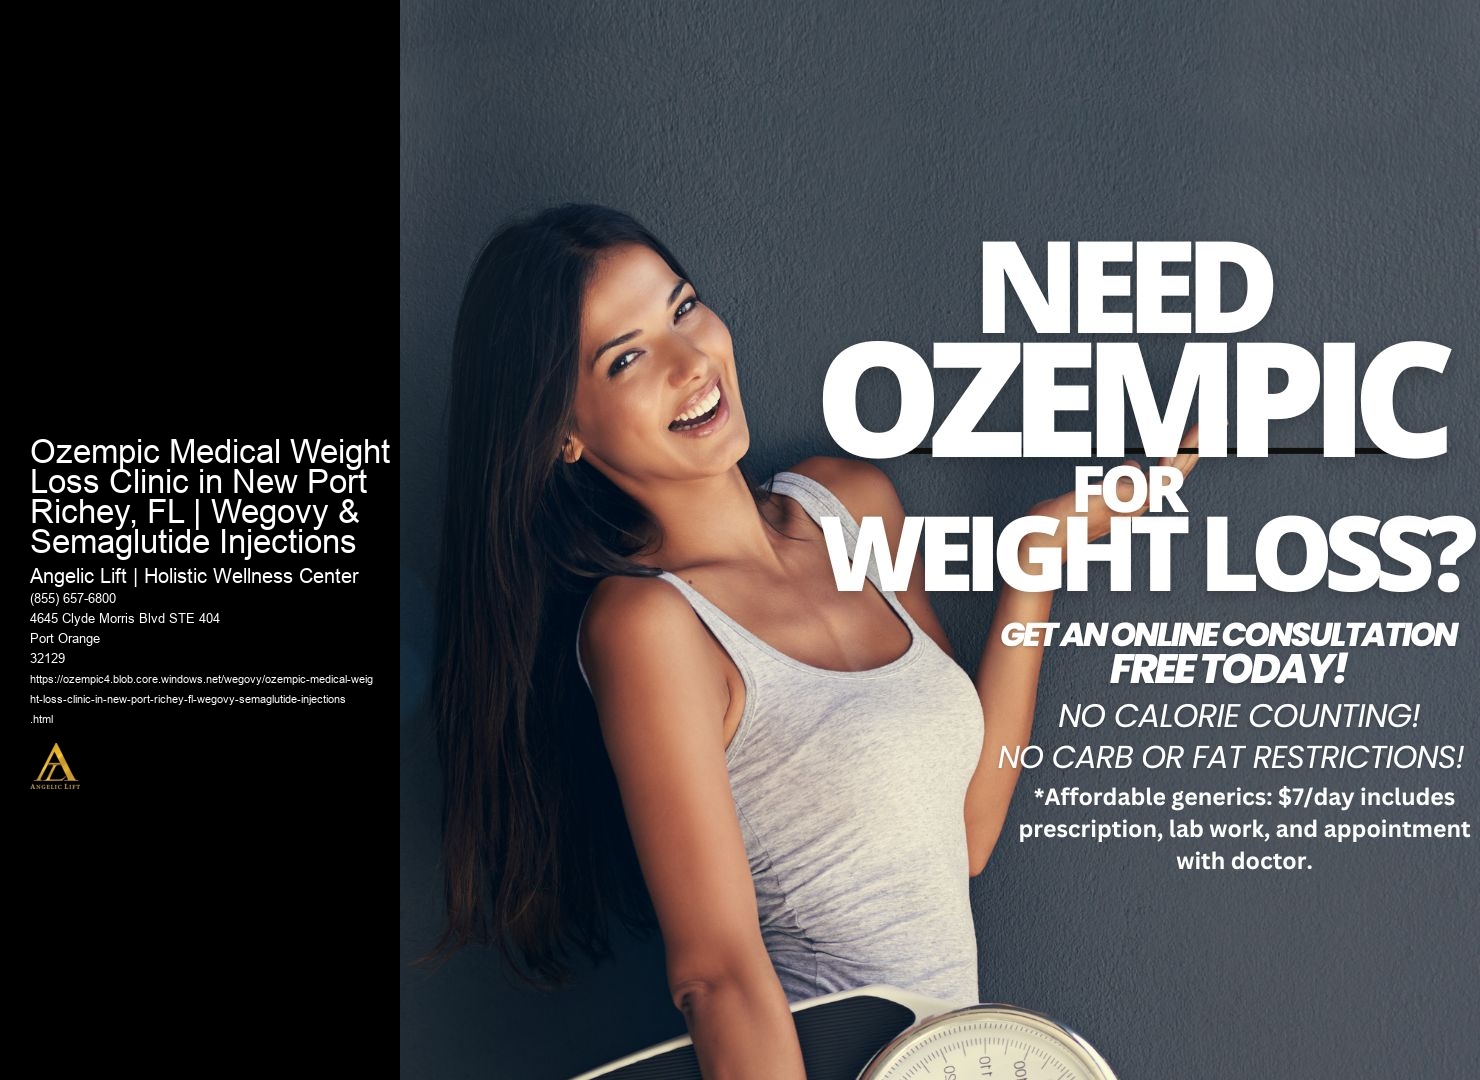 Ozempic Medical Weight Loss Clinic in New Port Richey, FL | Wegovy & Semaglutide Injections